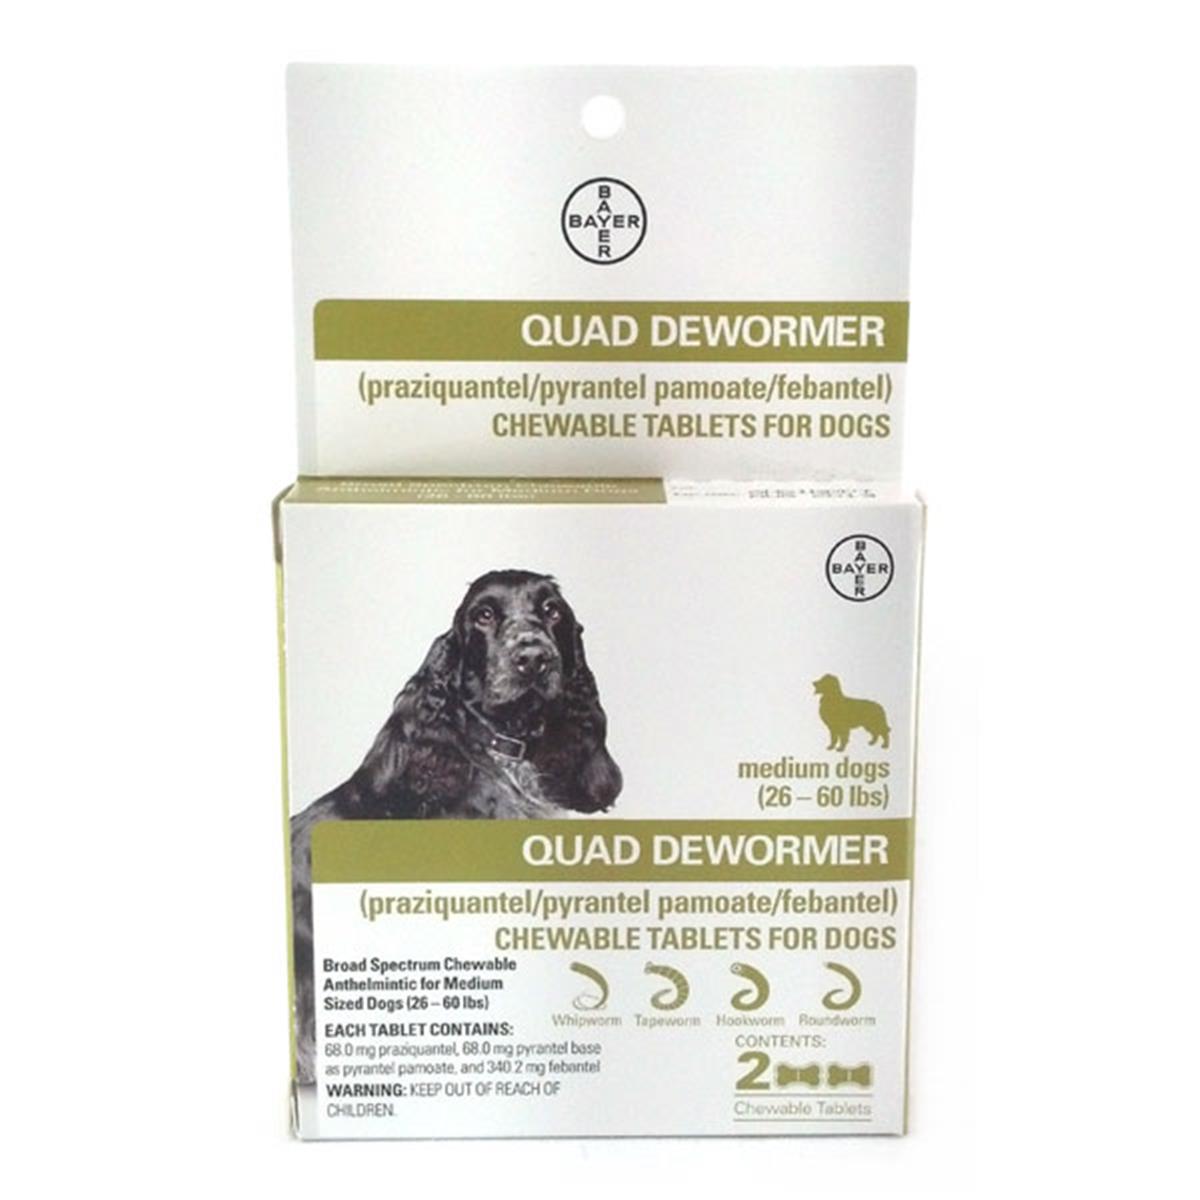 By11336 26-60 Lbs Bayer Quad Dewormer For Medium Dogs - 2 Chew Tabs